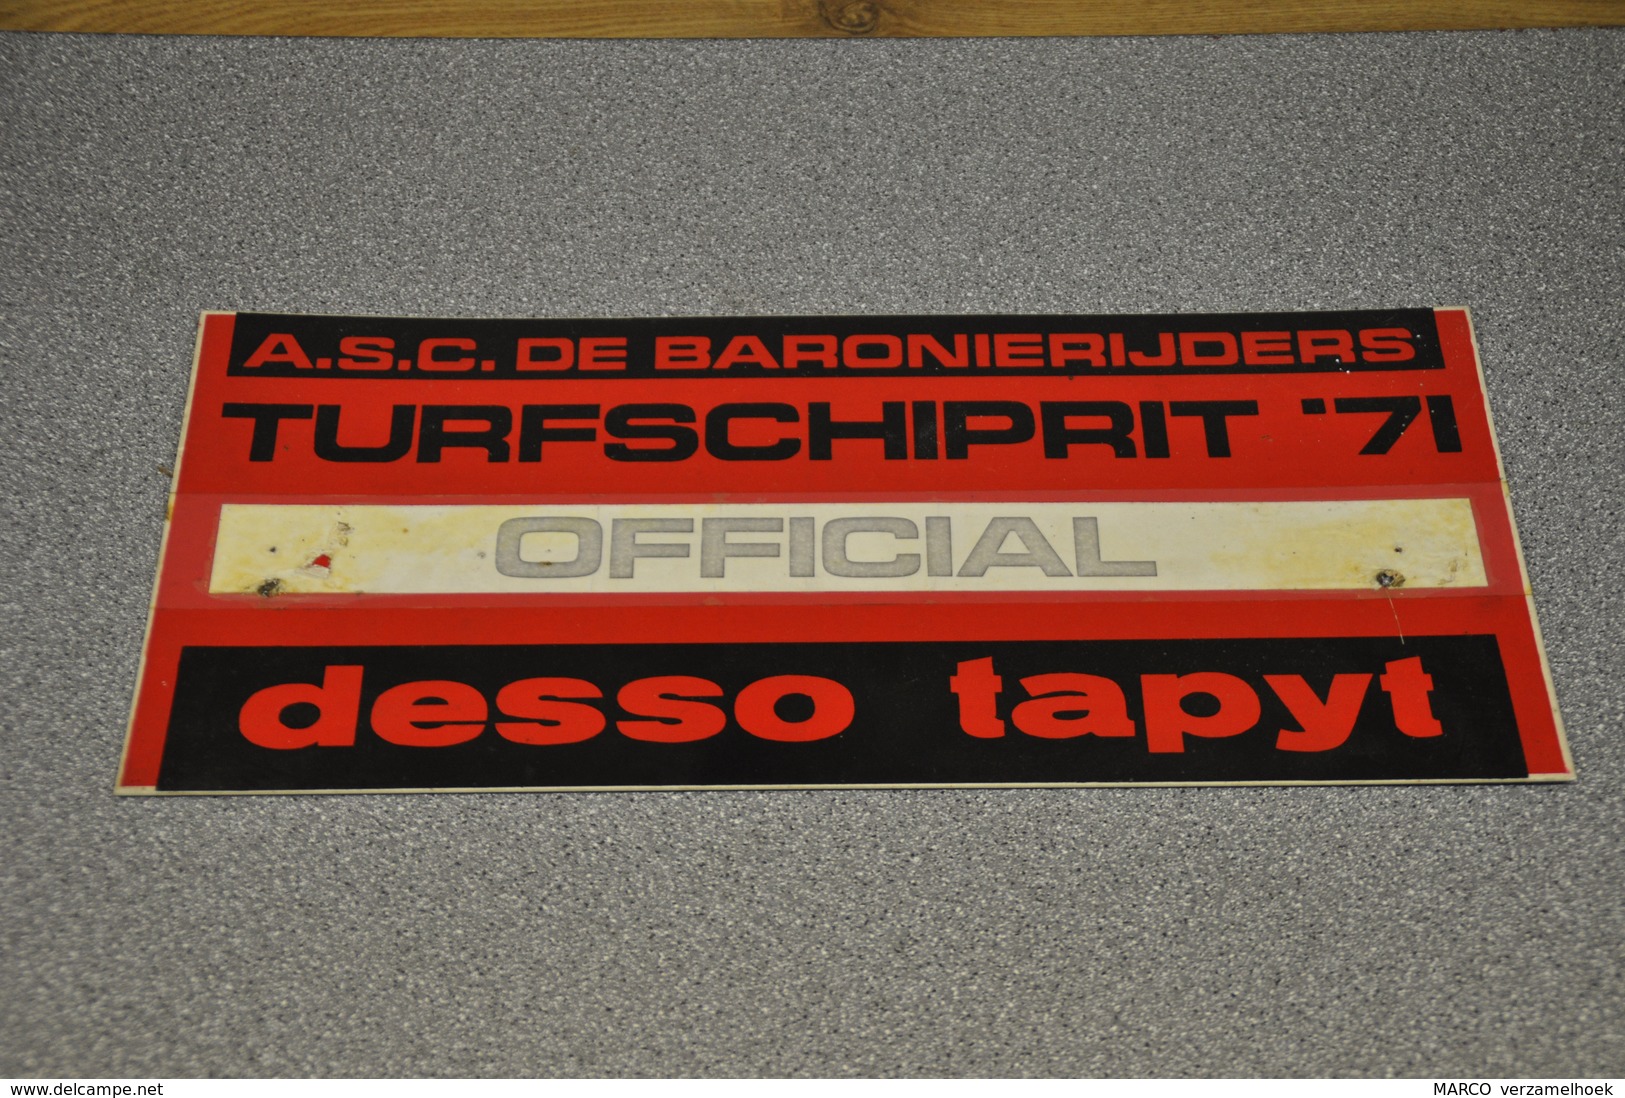 Rally Plaat-rallye Plaque Plastic: 17e Turfschiprit Breda 1971 OFFICIAL Desso Baronierijders - Rally-affiches